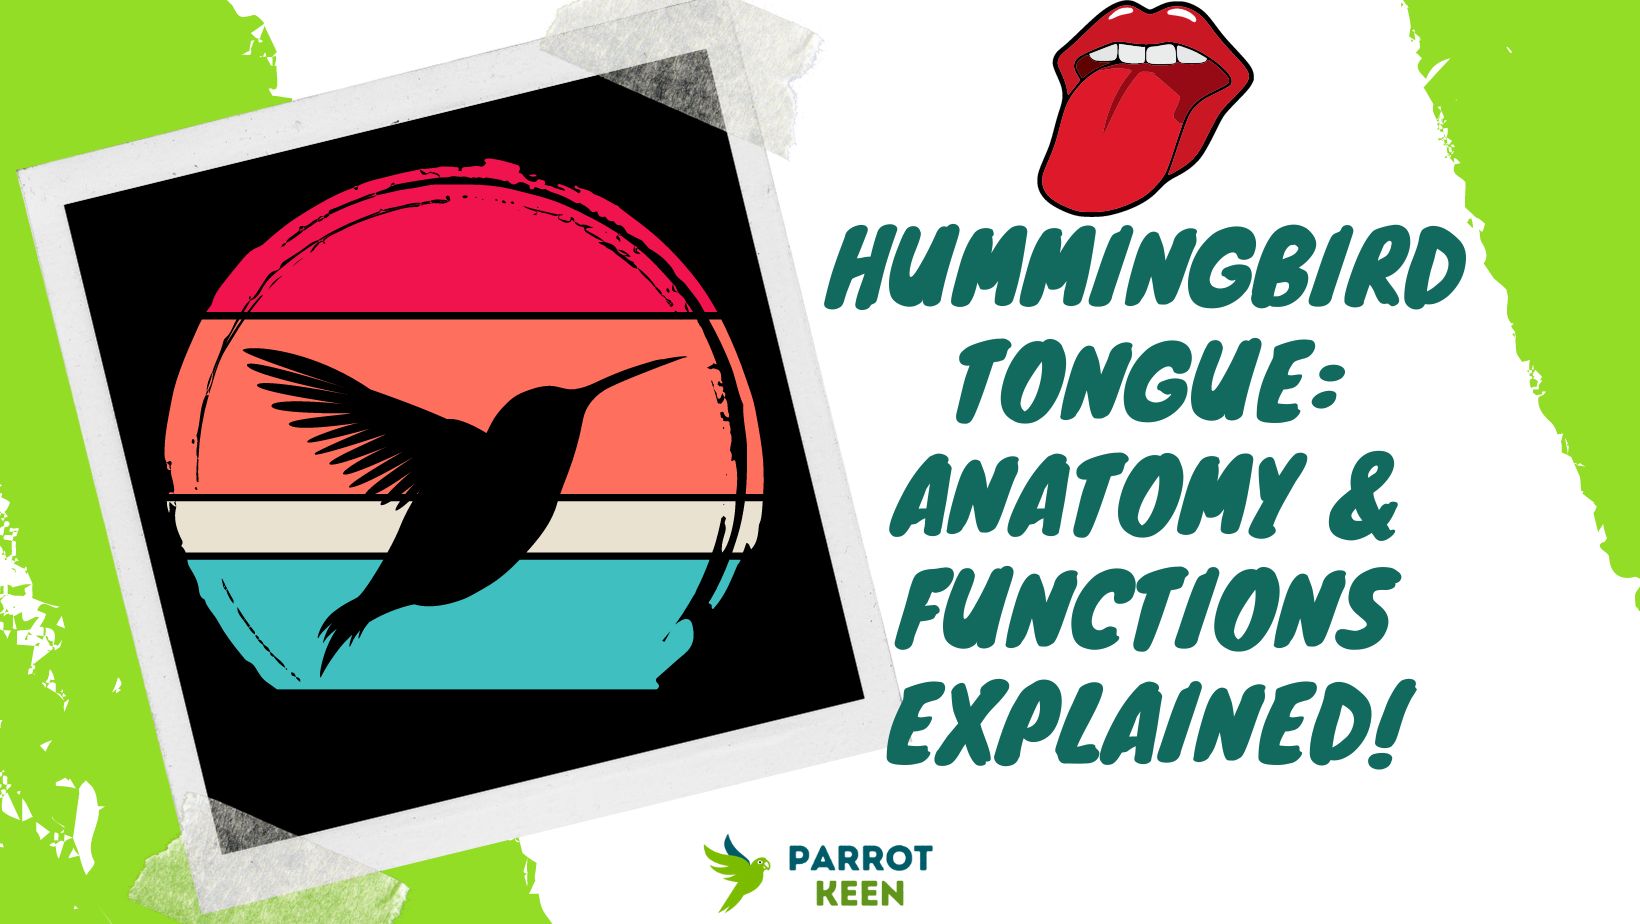 Hummingbird Tongue Anatomy and Functions Explained!